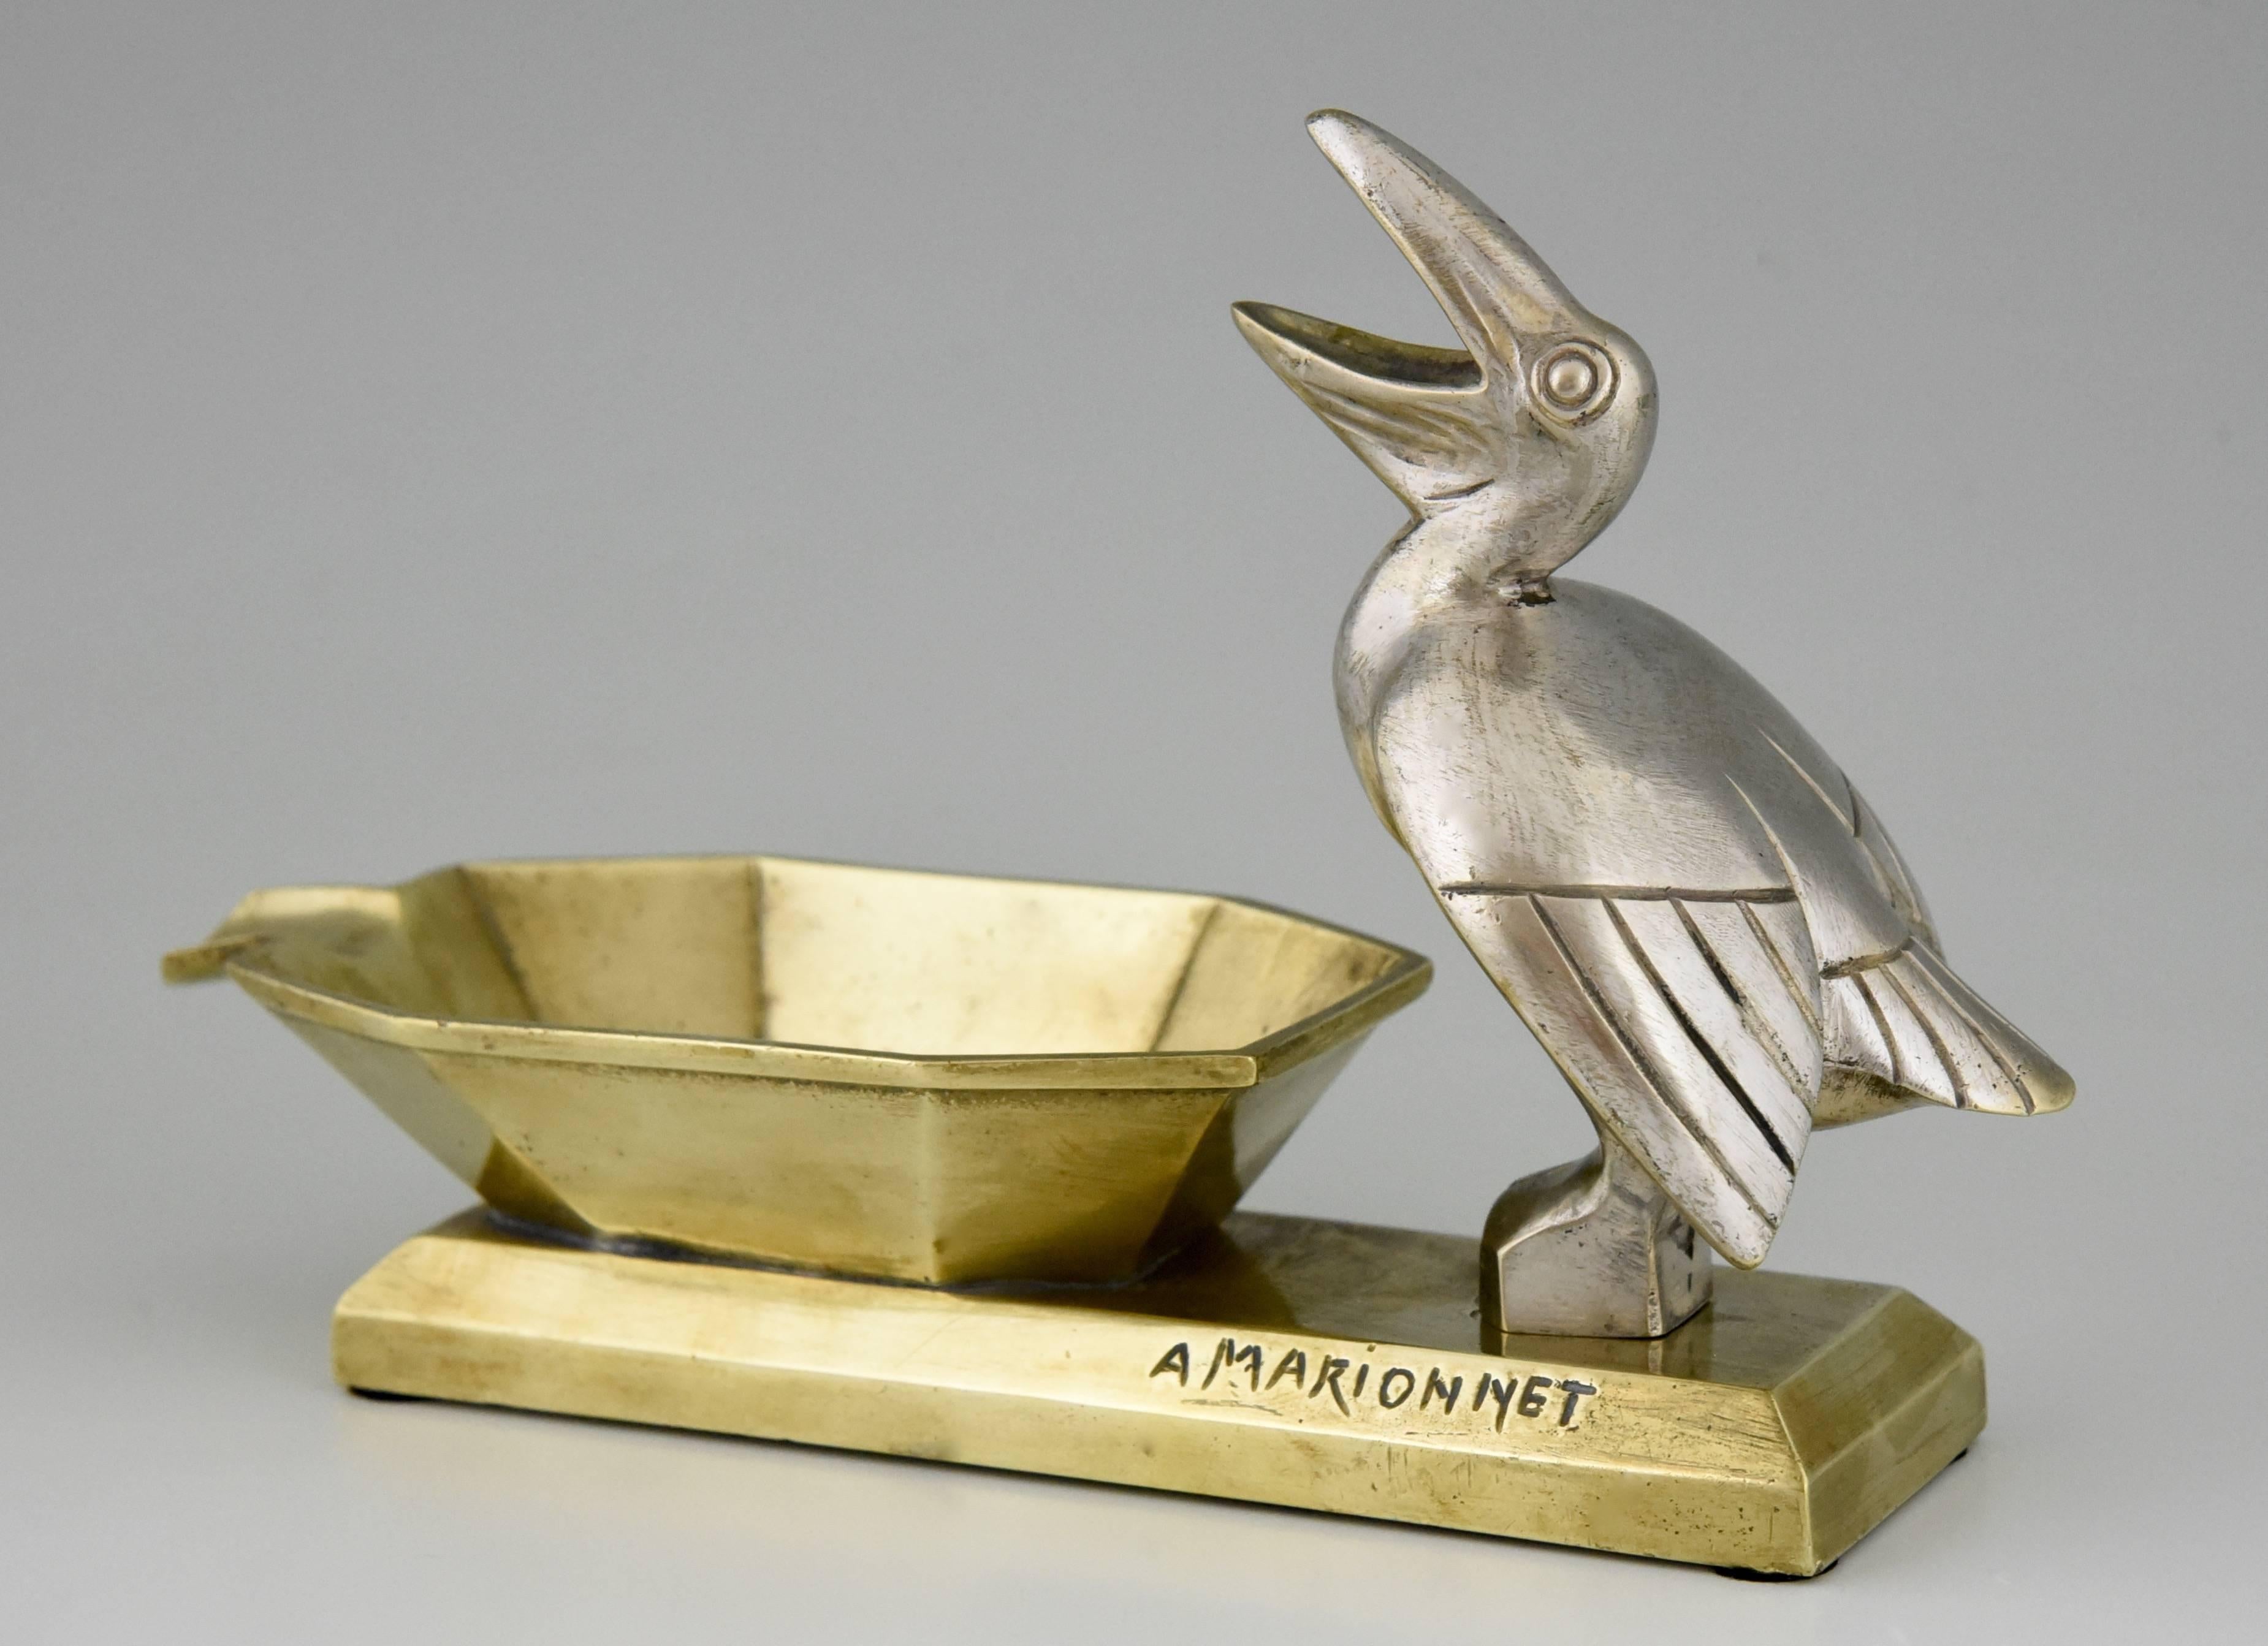 Rare Art Deco bronze ashtray with pelican by the French artist A. Marionnet.

Artist/Maker:
A. Marionnet.
Signature/Marks:
A. Marionnet.
Style:
Art Deco.
Date:
1925.
Material:
Bronze and silvered bronze.
Origin:
France.
Size cm:
H.